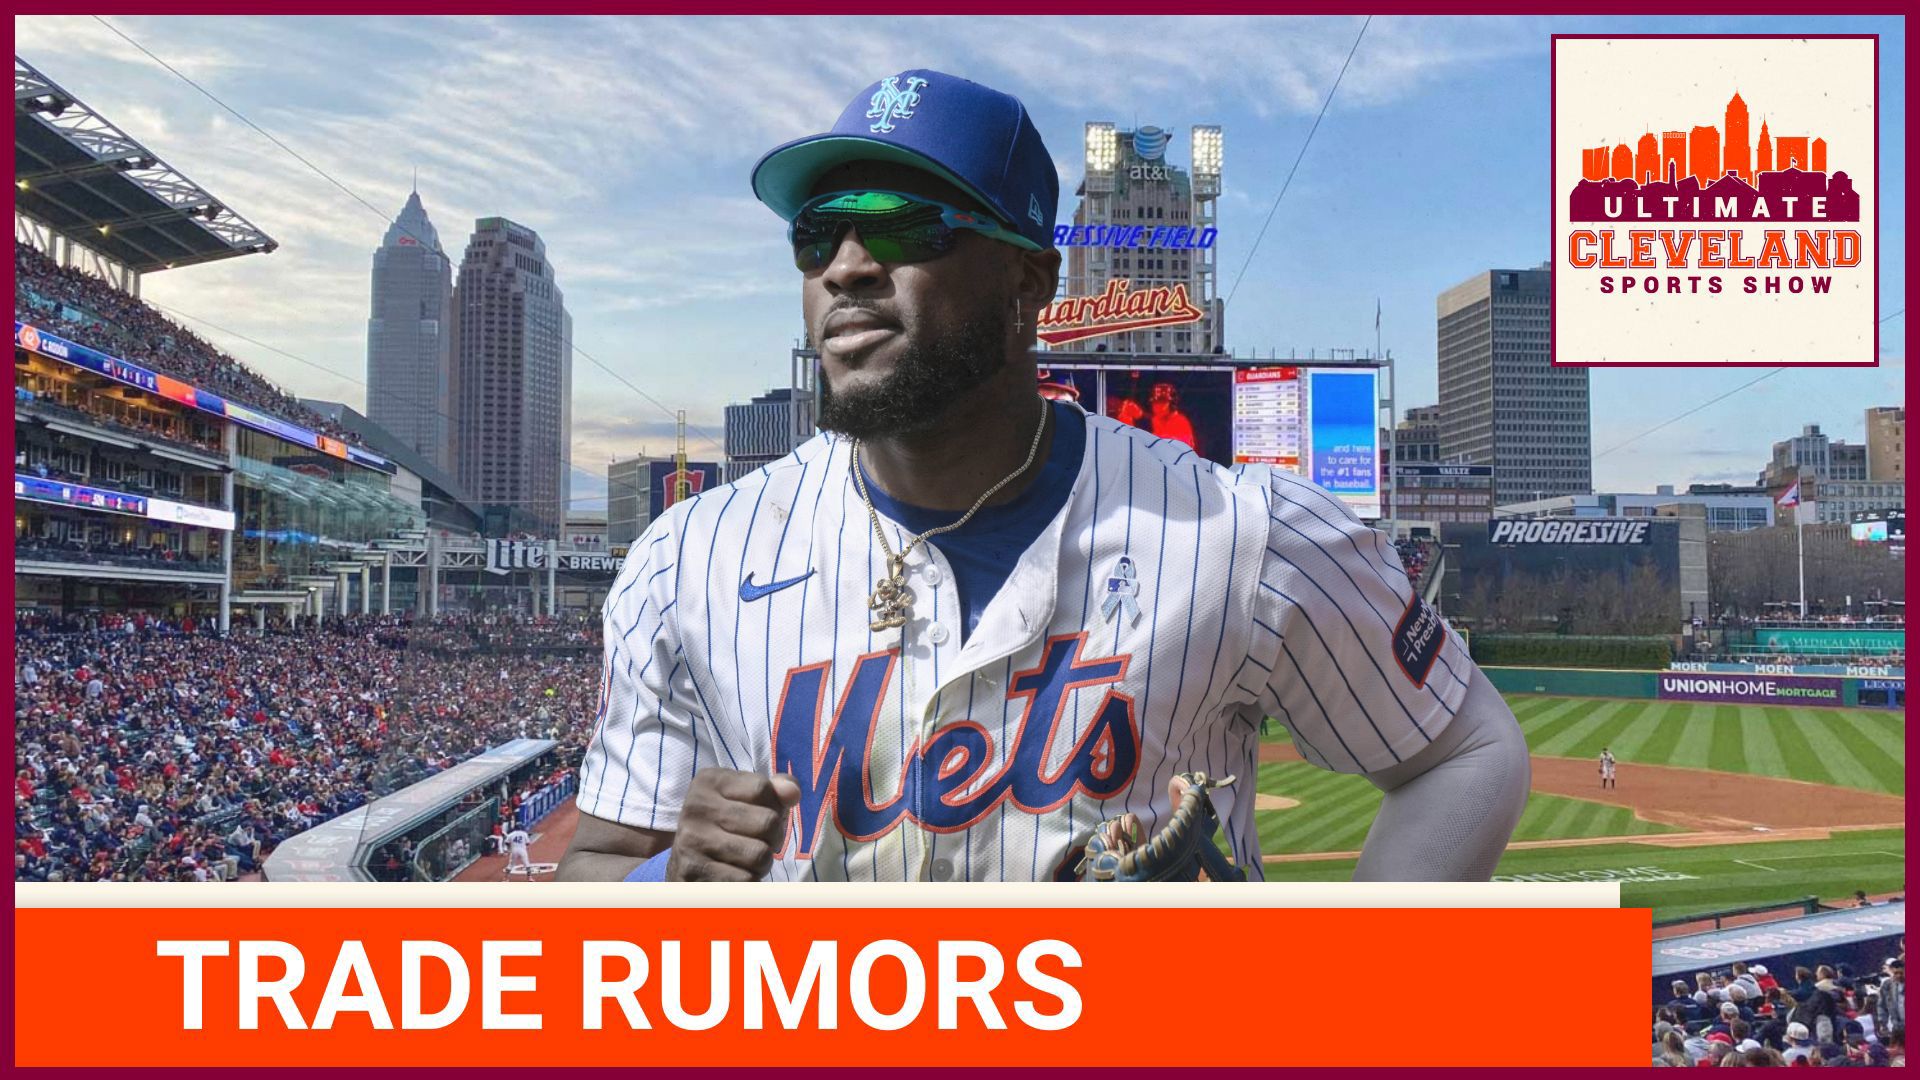 Is Starling Marte the answer to the Cleveland Guardians problems? Some are saying the New York Mets outfielder could be just what the Guards need.